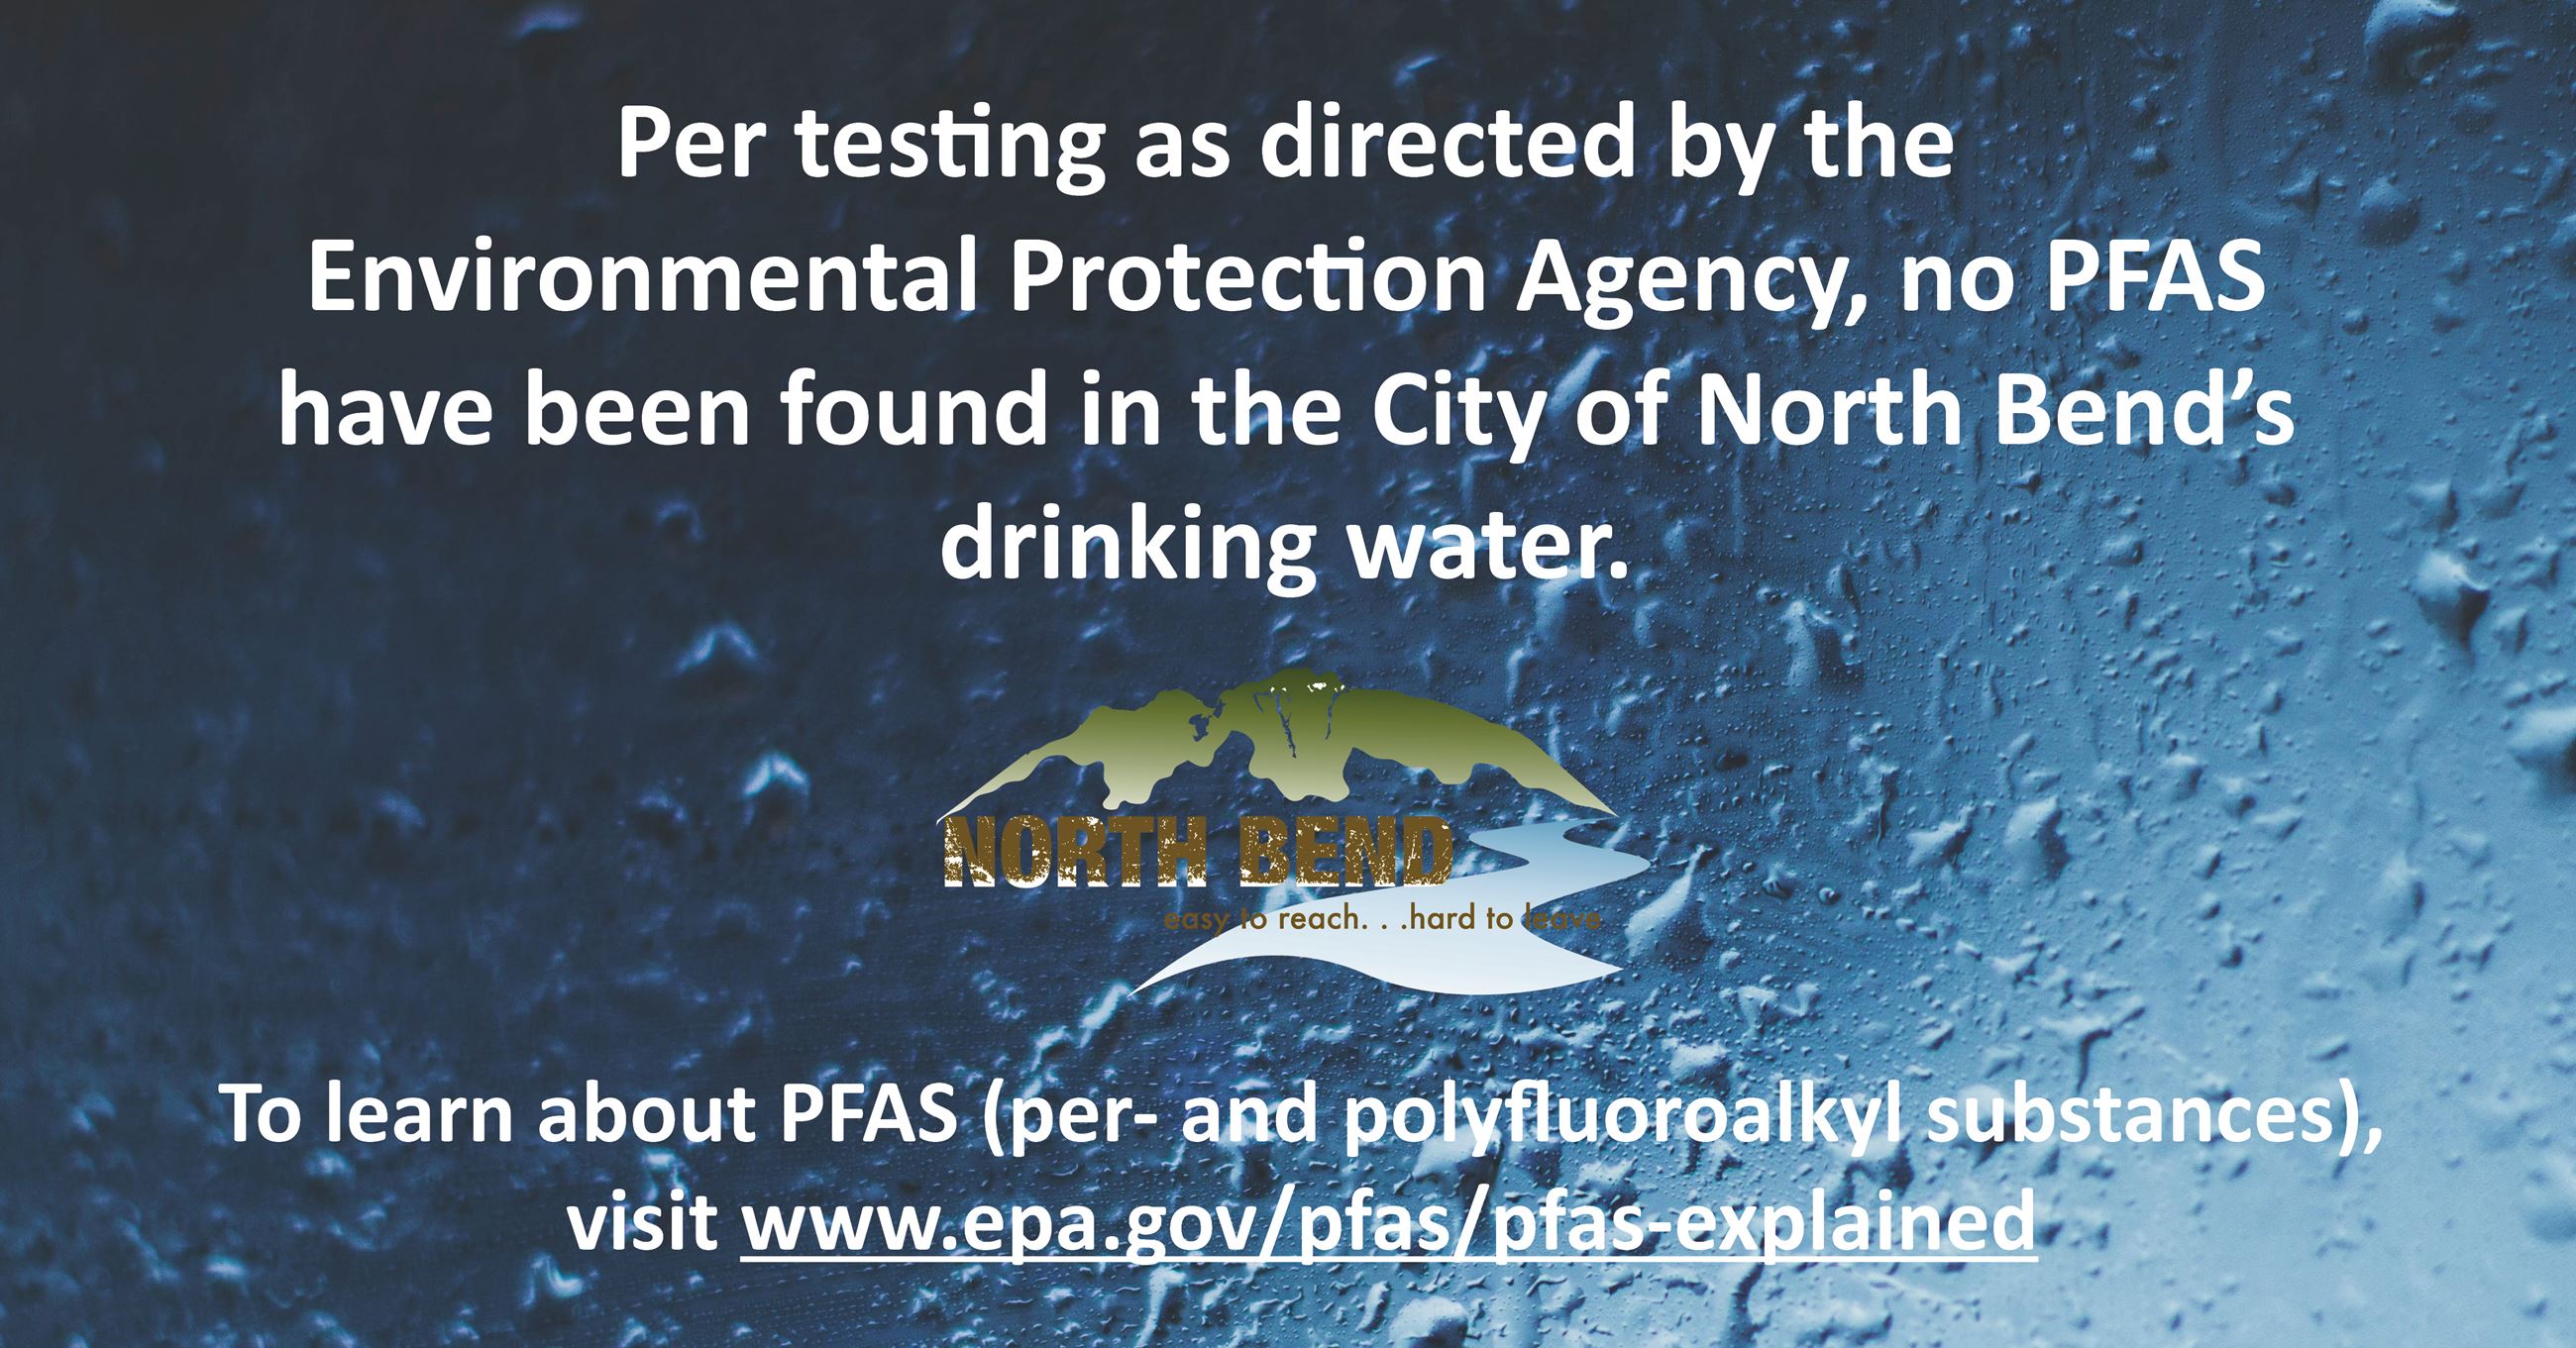  Scheduled testing continues to show no PFAS in City's water system 